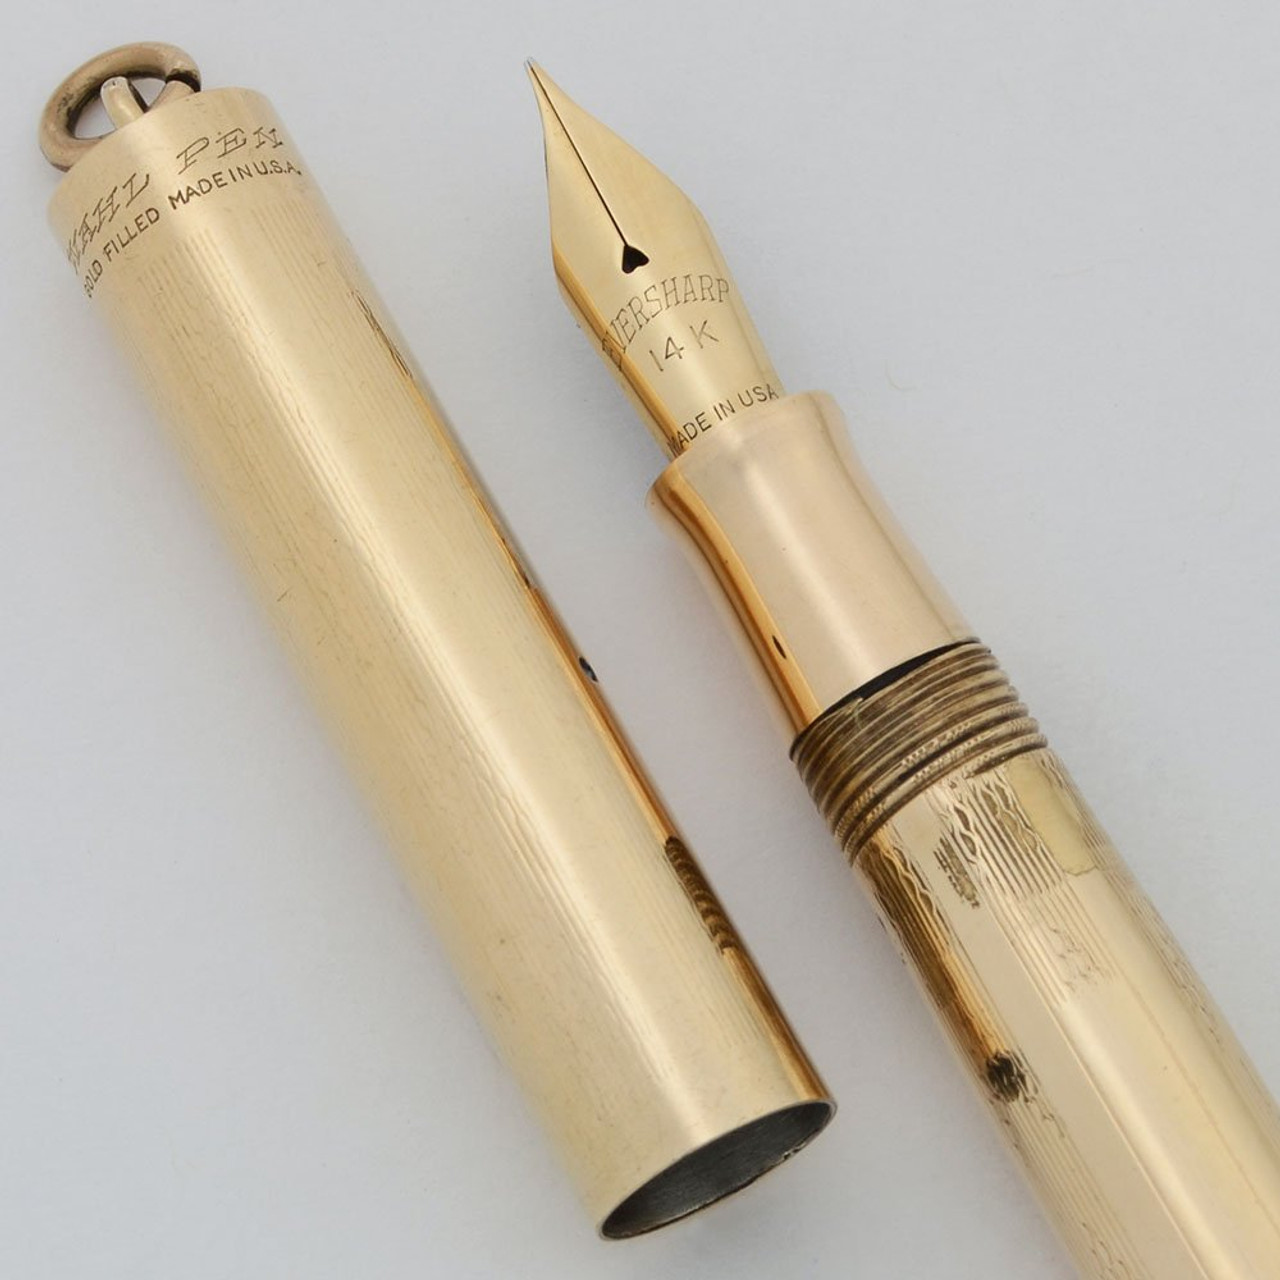 Wahl Fountain Pen #2 Ring Top - Yellow Gold Filled Dart Design, Flexible Extra Fine Eversharp Nib (Excellent, Restored)